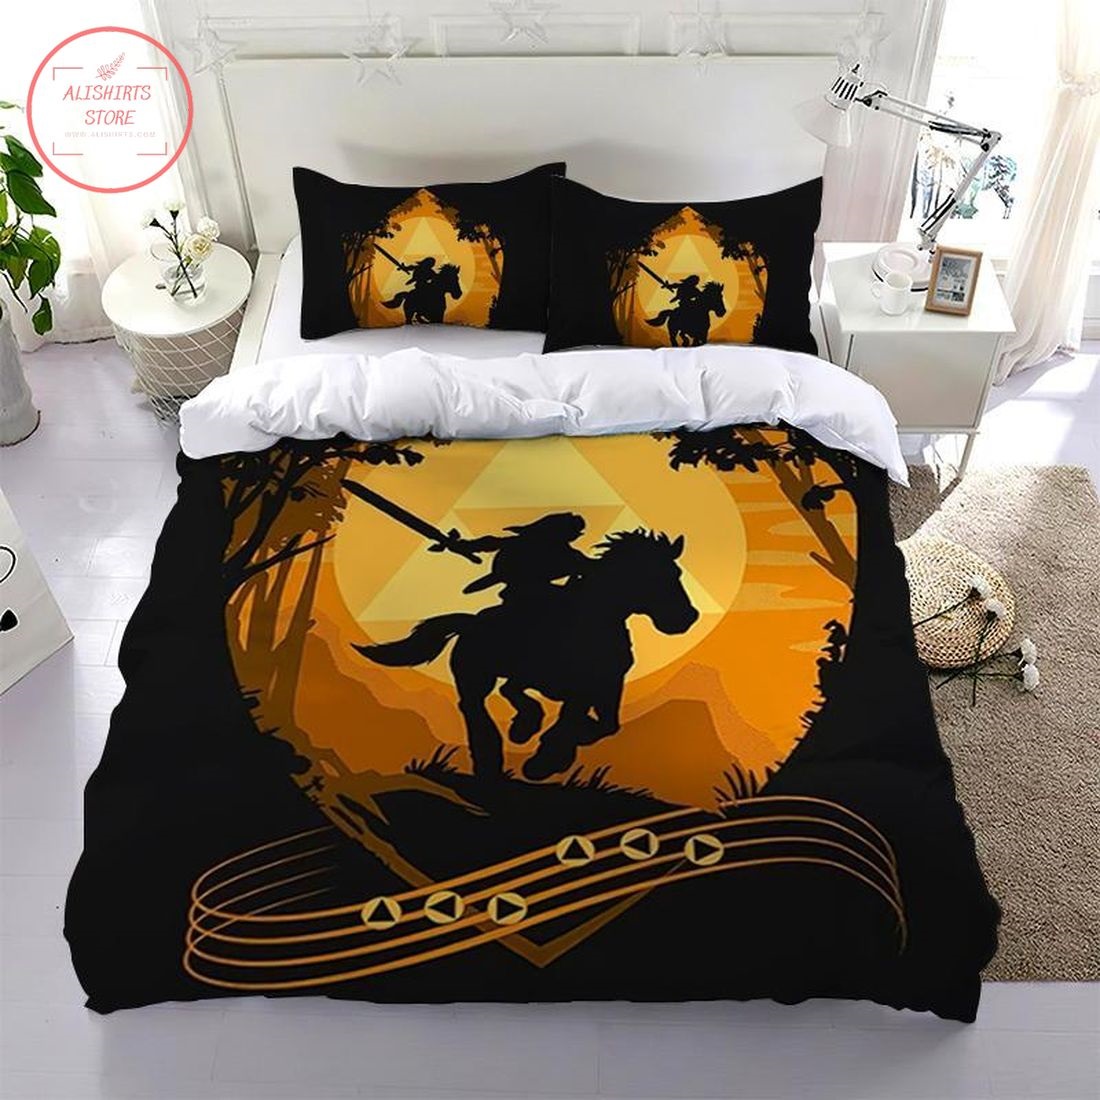 Zelda Link In A Hurry Silhouette Bedding Set